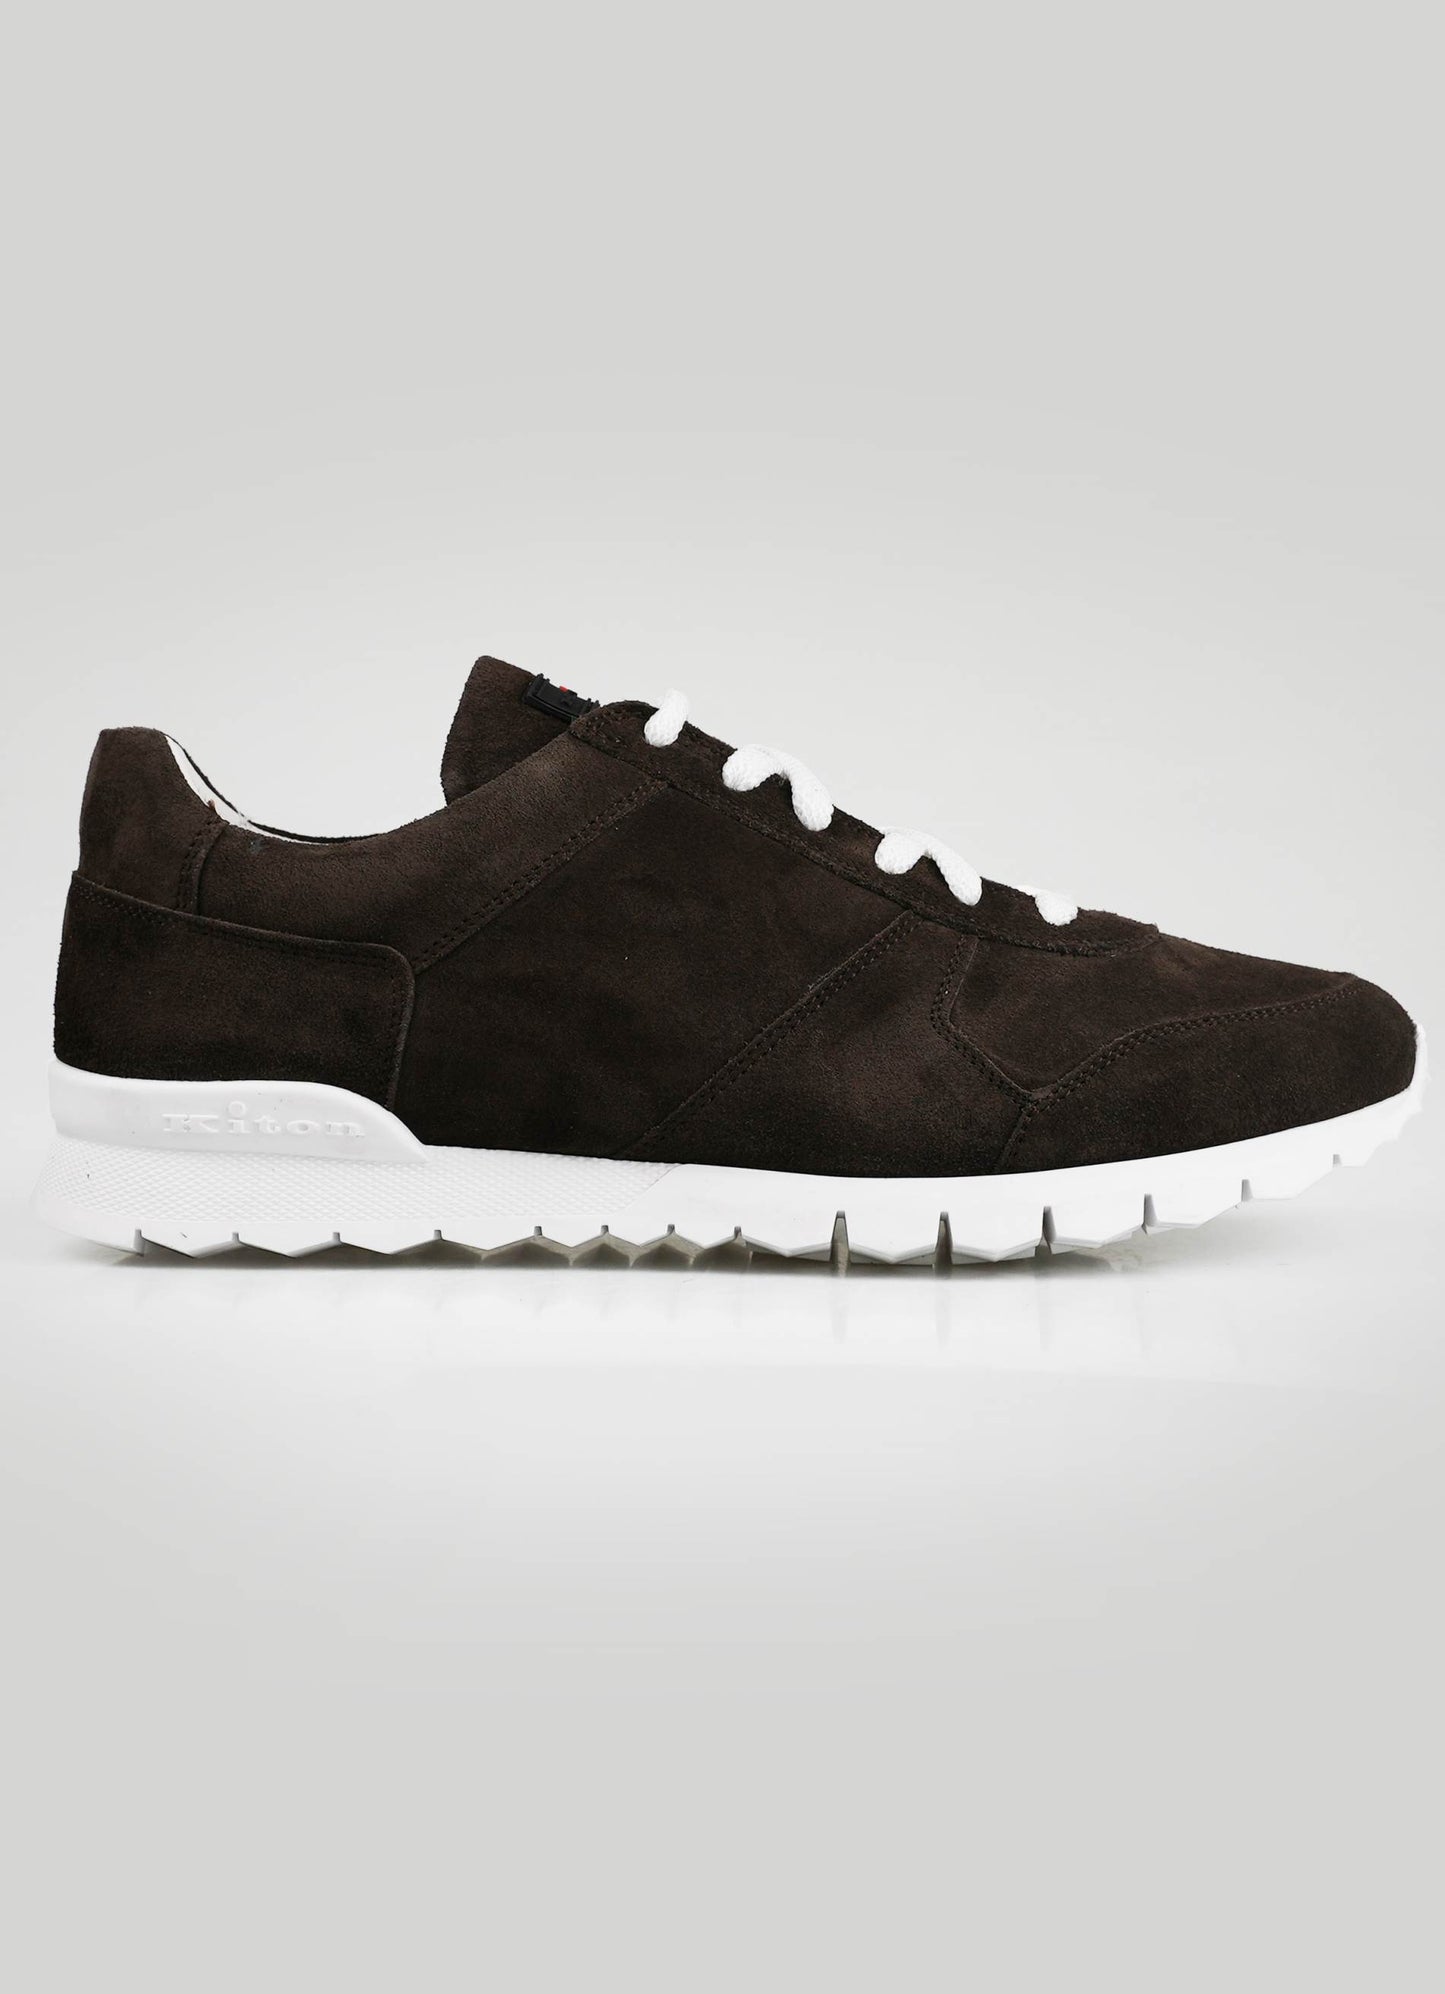 Kiton Dark Brown Leather Suede Sneakers